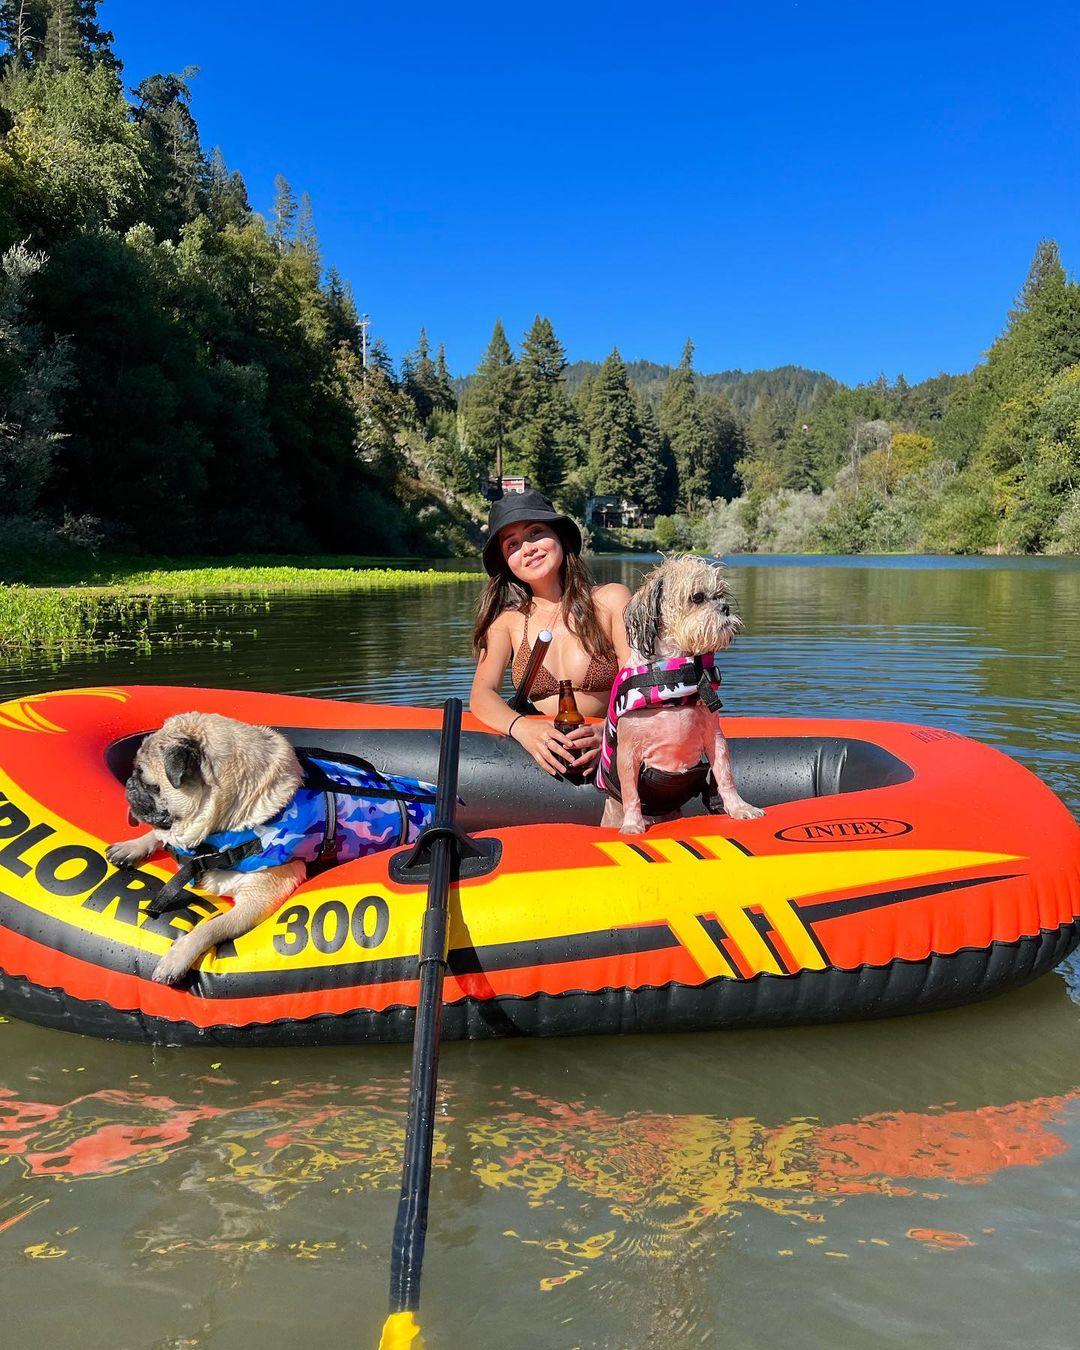 class="content__text"
 Labor day camping with my babies 🐶 #firstcampingtrip #doggos #russianriver 
 